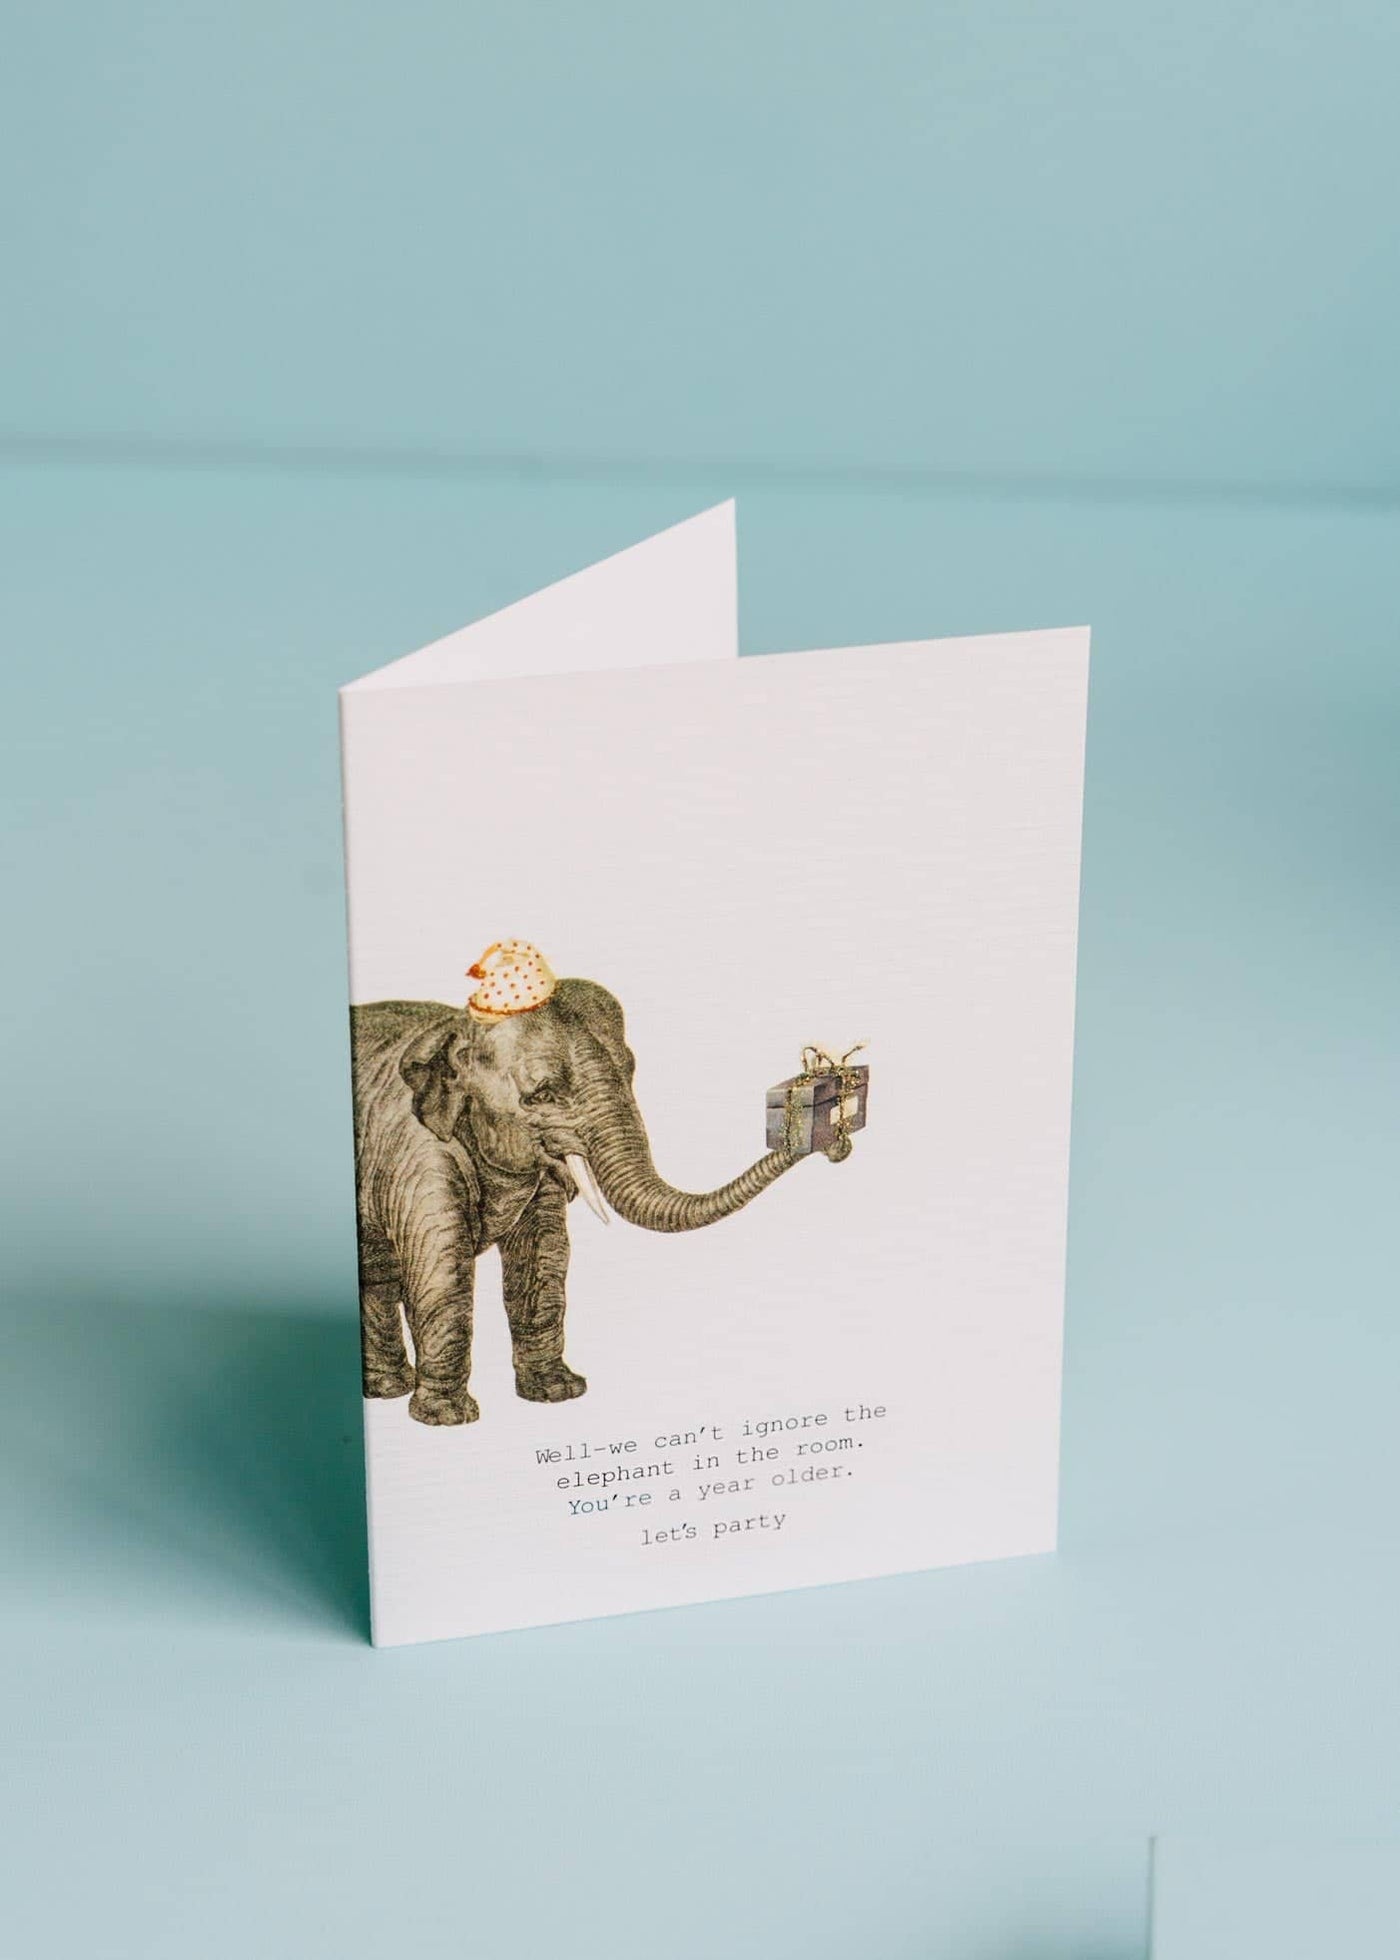 BIRTHDAY CARD "WE CAN'T IGNORE THE ELEPHANT"